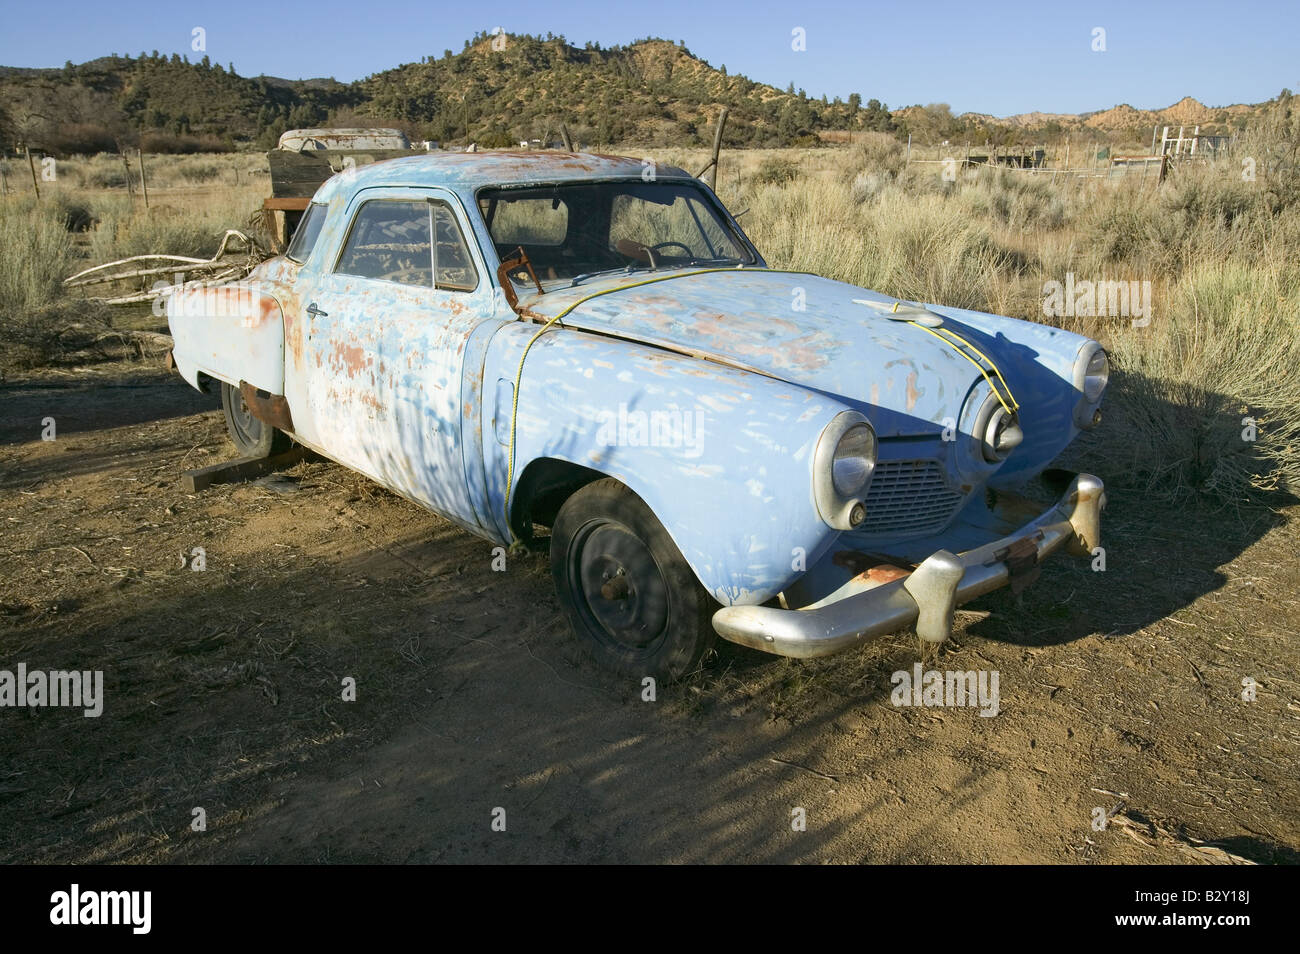 Rusted out mid-50's blue Studebaker on side of road, Route 33, near Cuyama, California Stock Photo